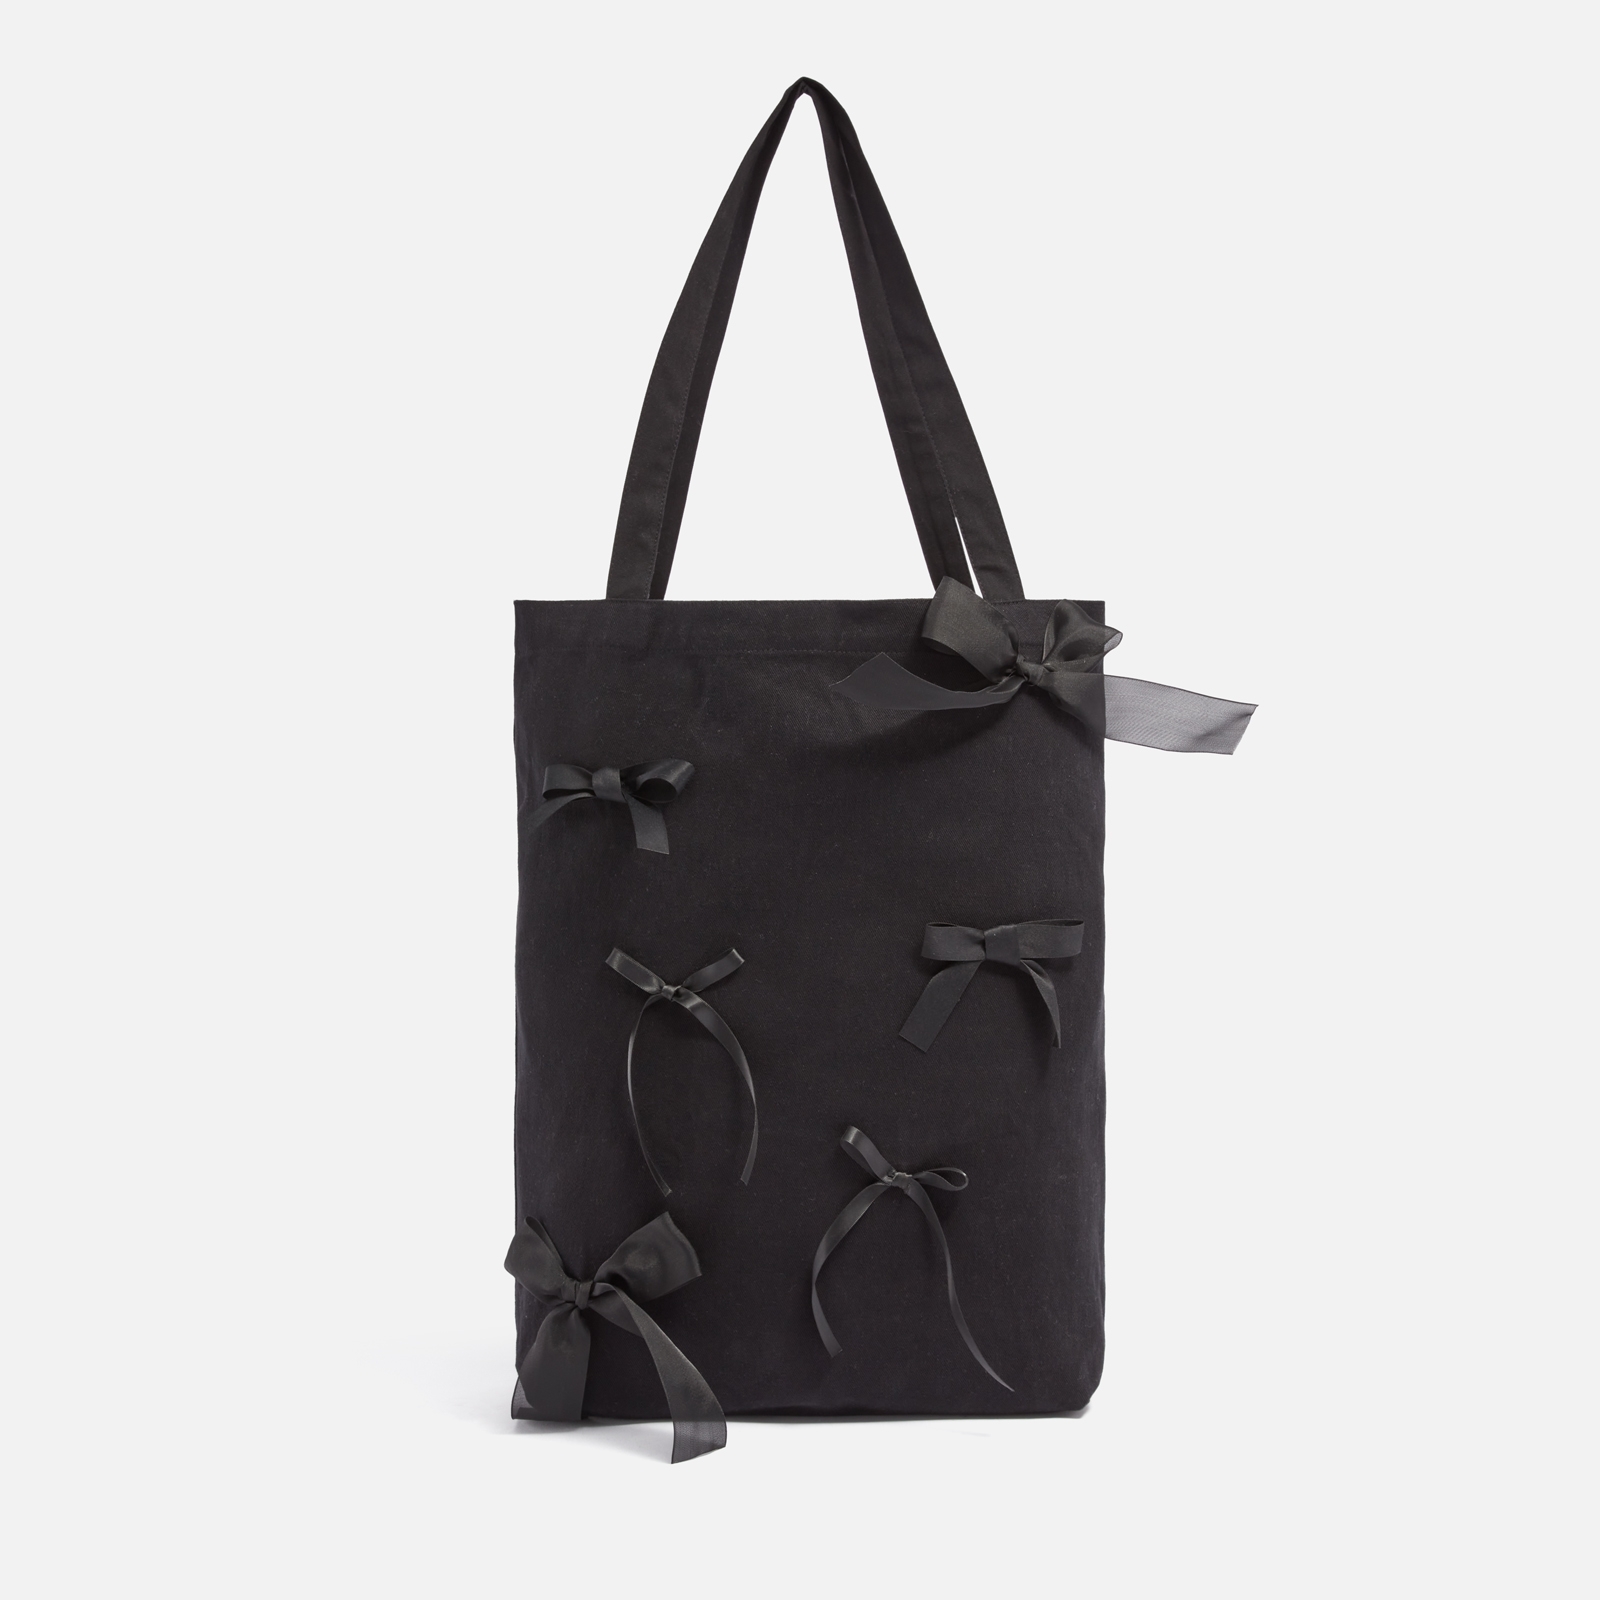 Sister Jane Butter Bow Cotton-Twill Tote Bag